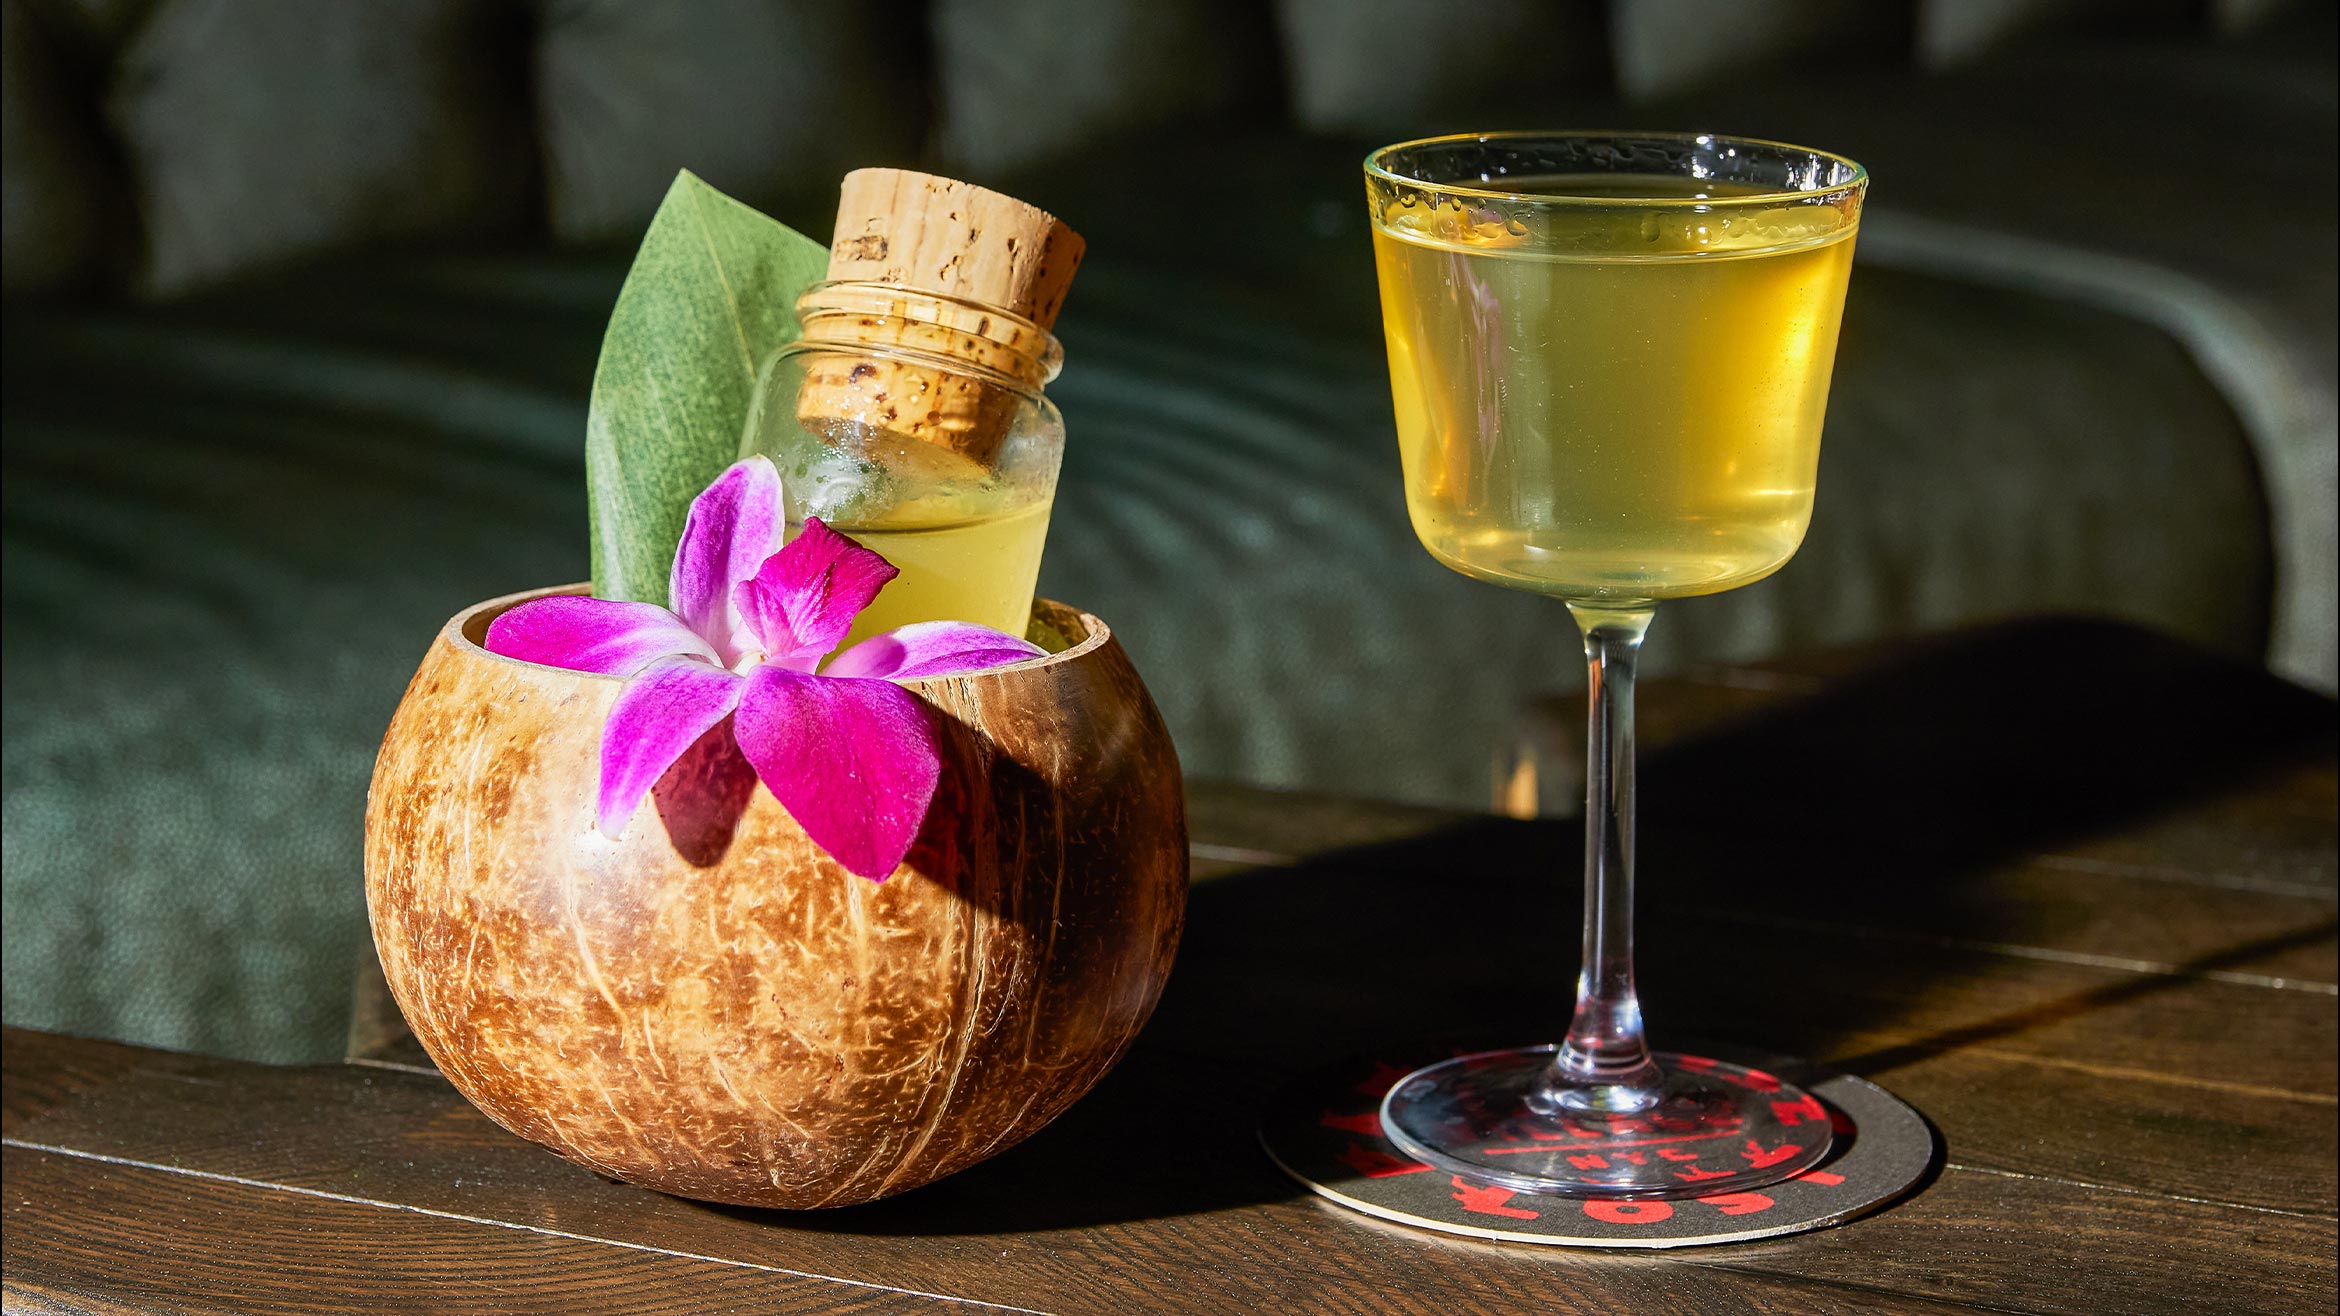 A half coconut shell holding a bottle of liquid closed with a cork and a floral garnish alongside a small, but full, cocktail glass